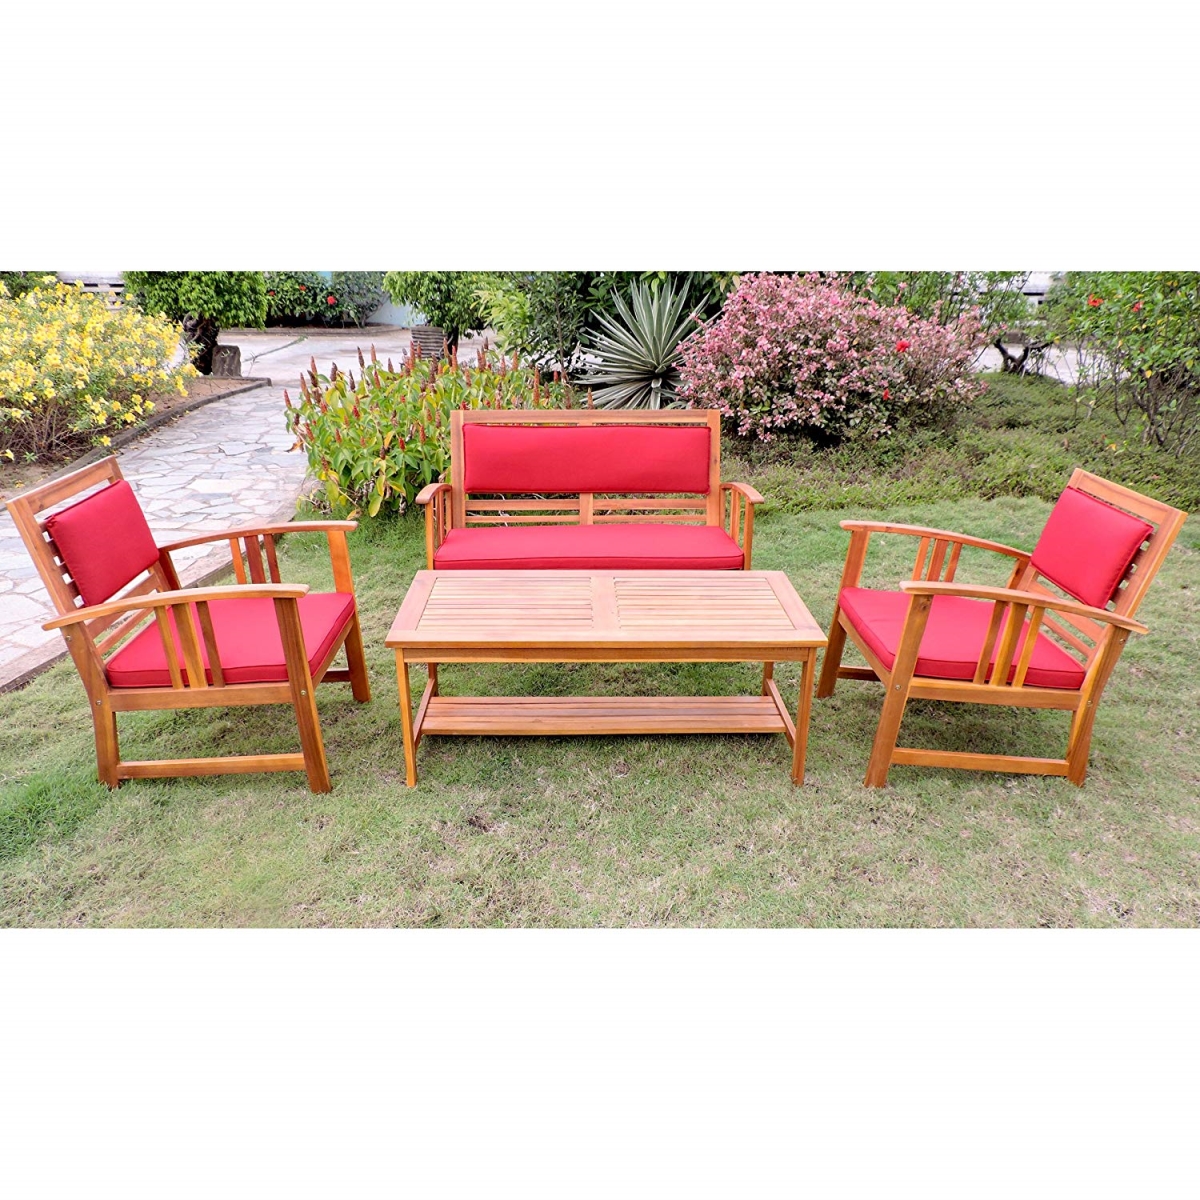 Tt-103-ac-s4-rr Royal Tahiti Brisbane Acacia Settee Group With Cushions, Ruby Red - 4 Piece